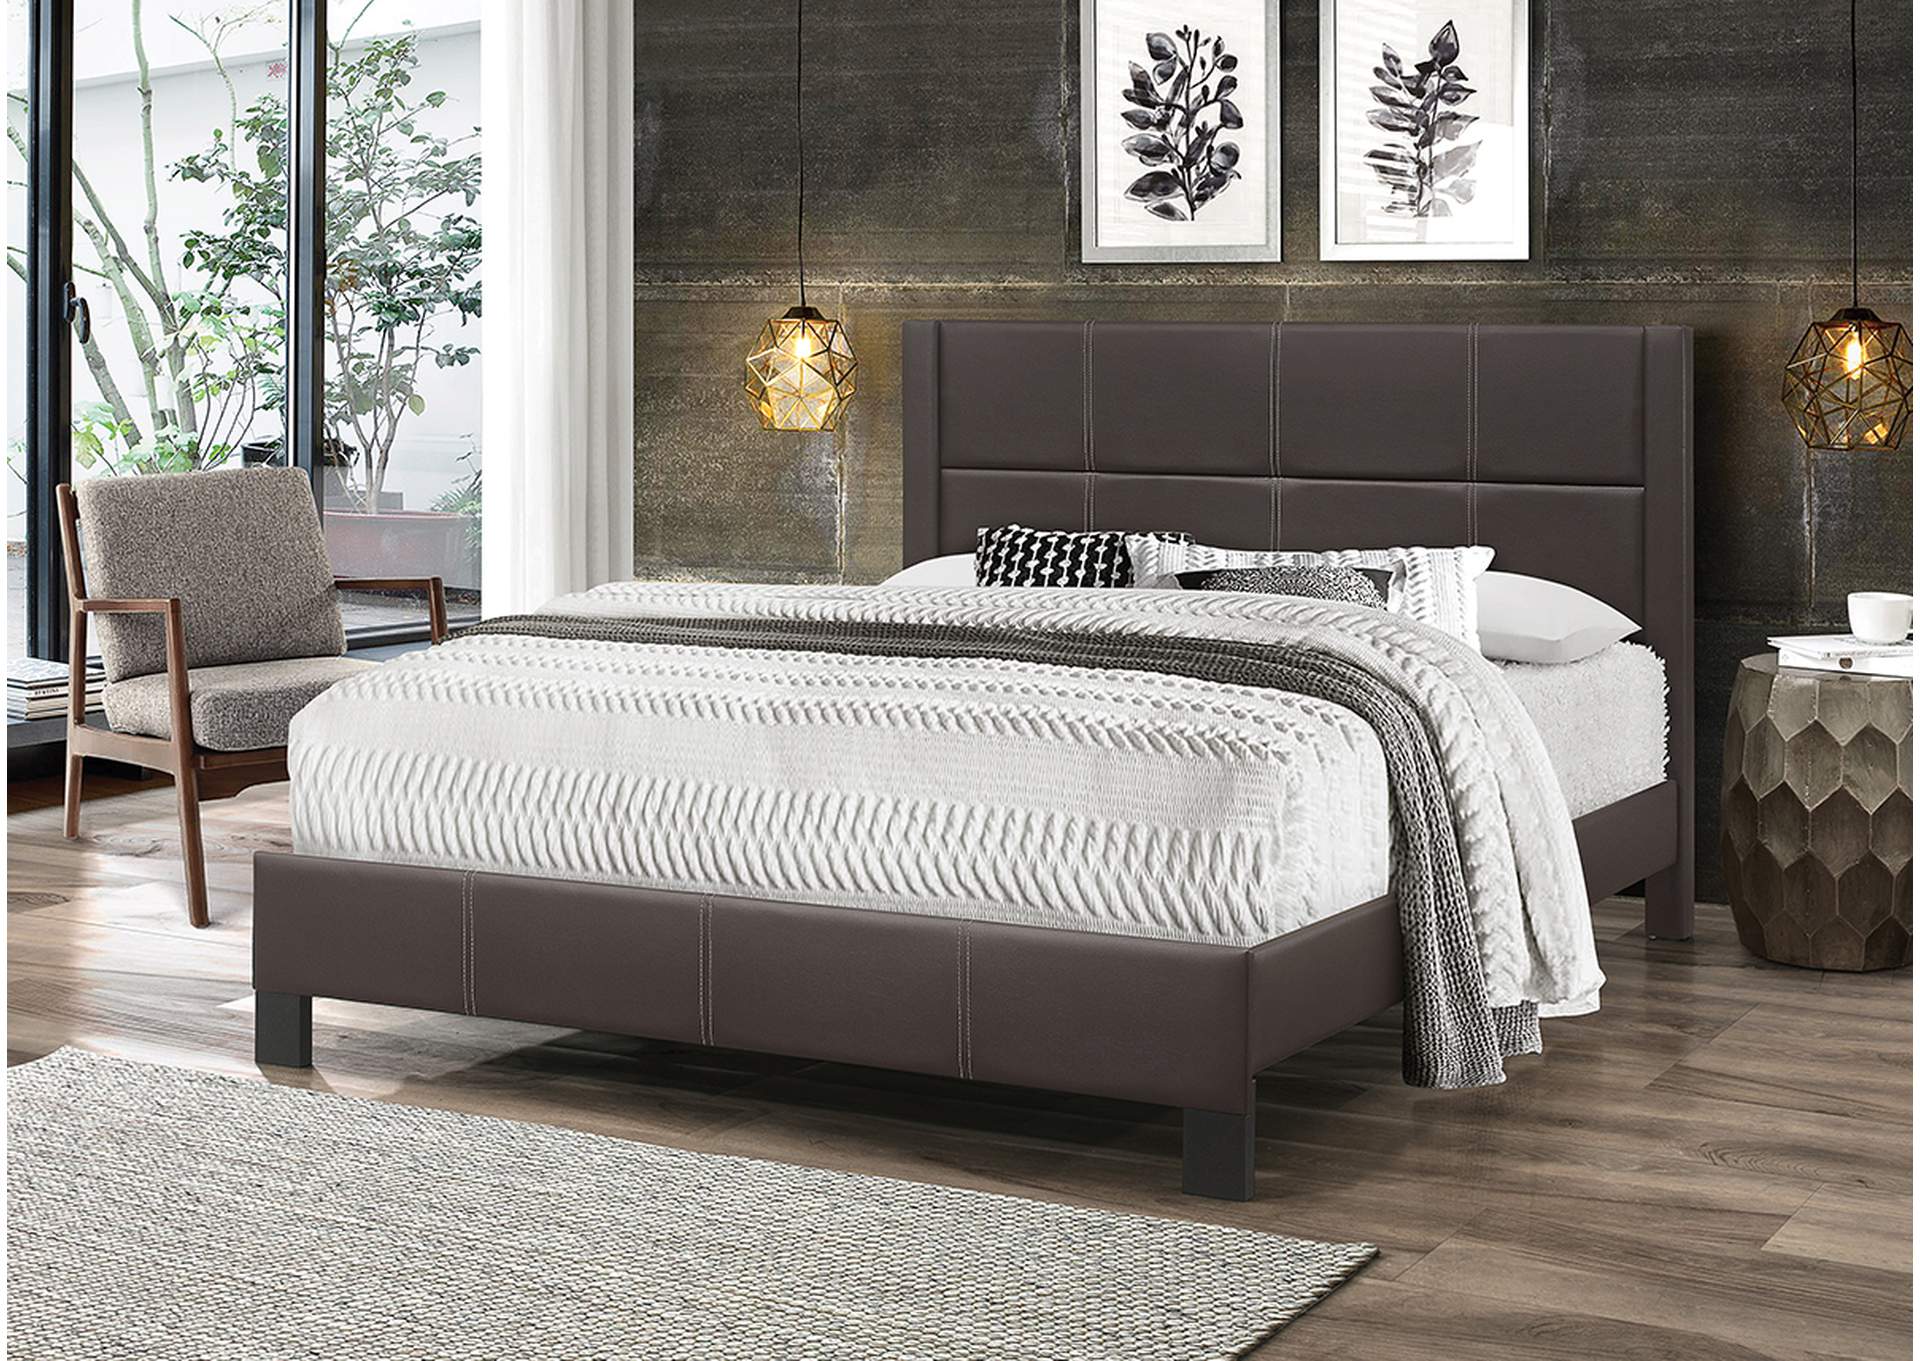 B600 Twin Bed,Nationwide